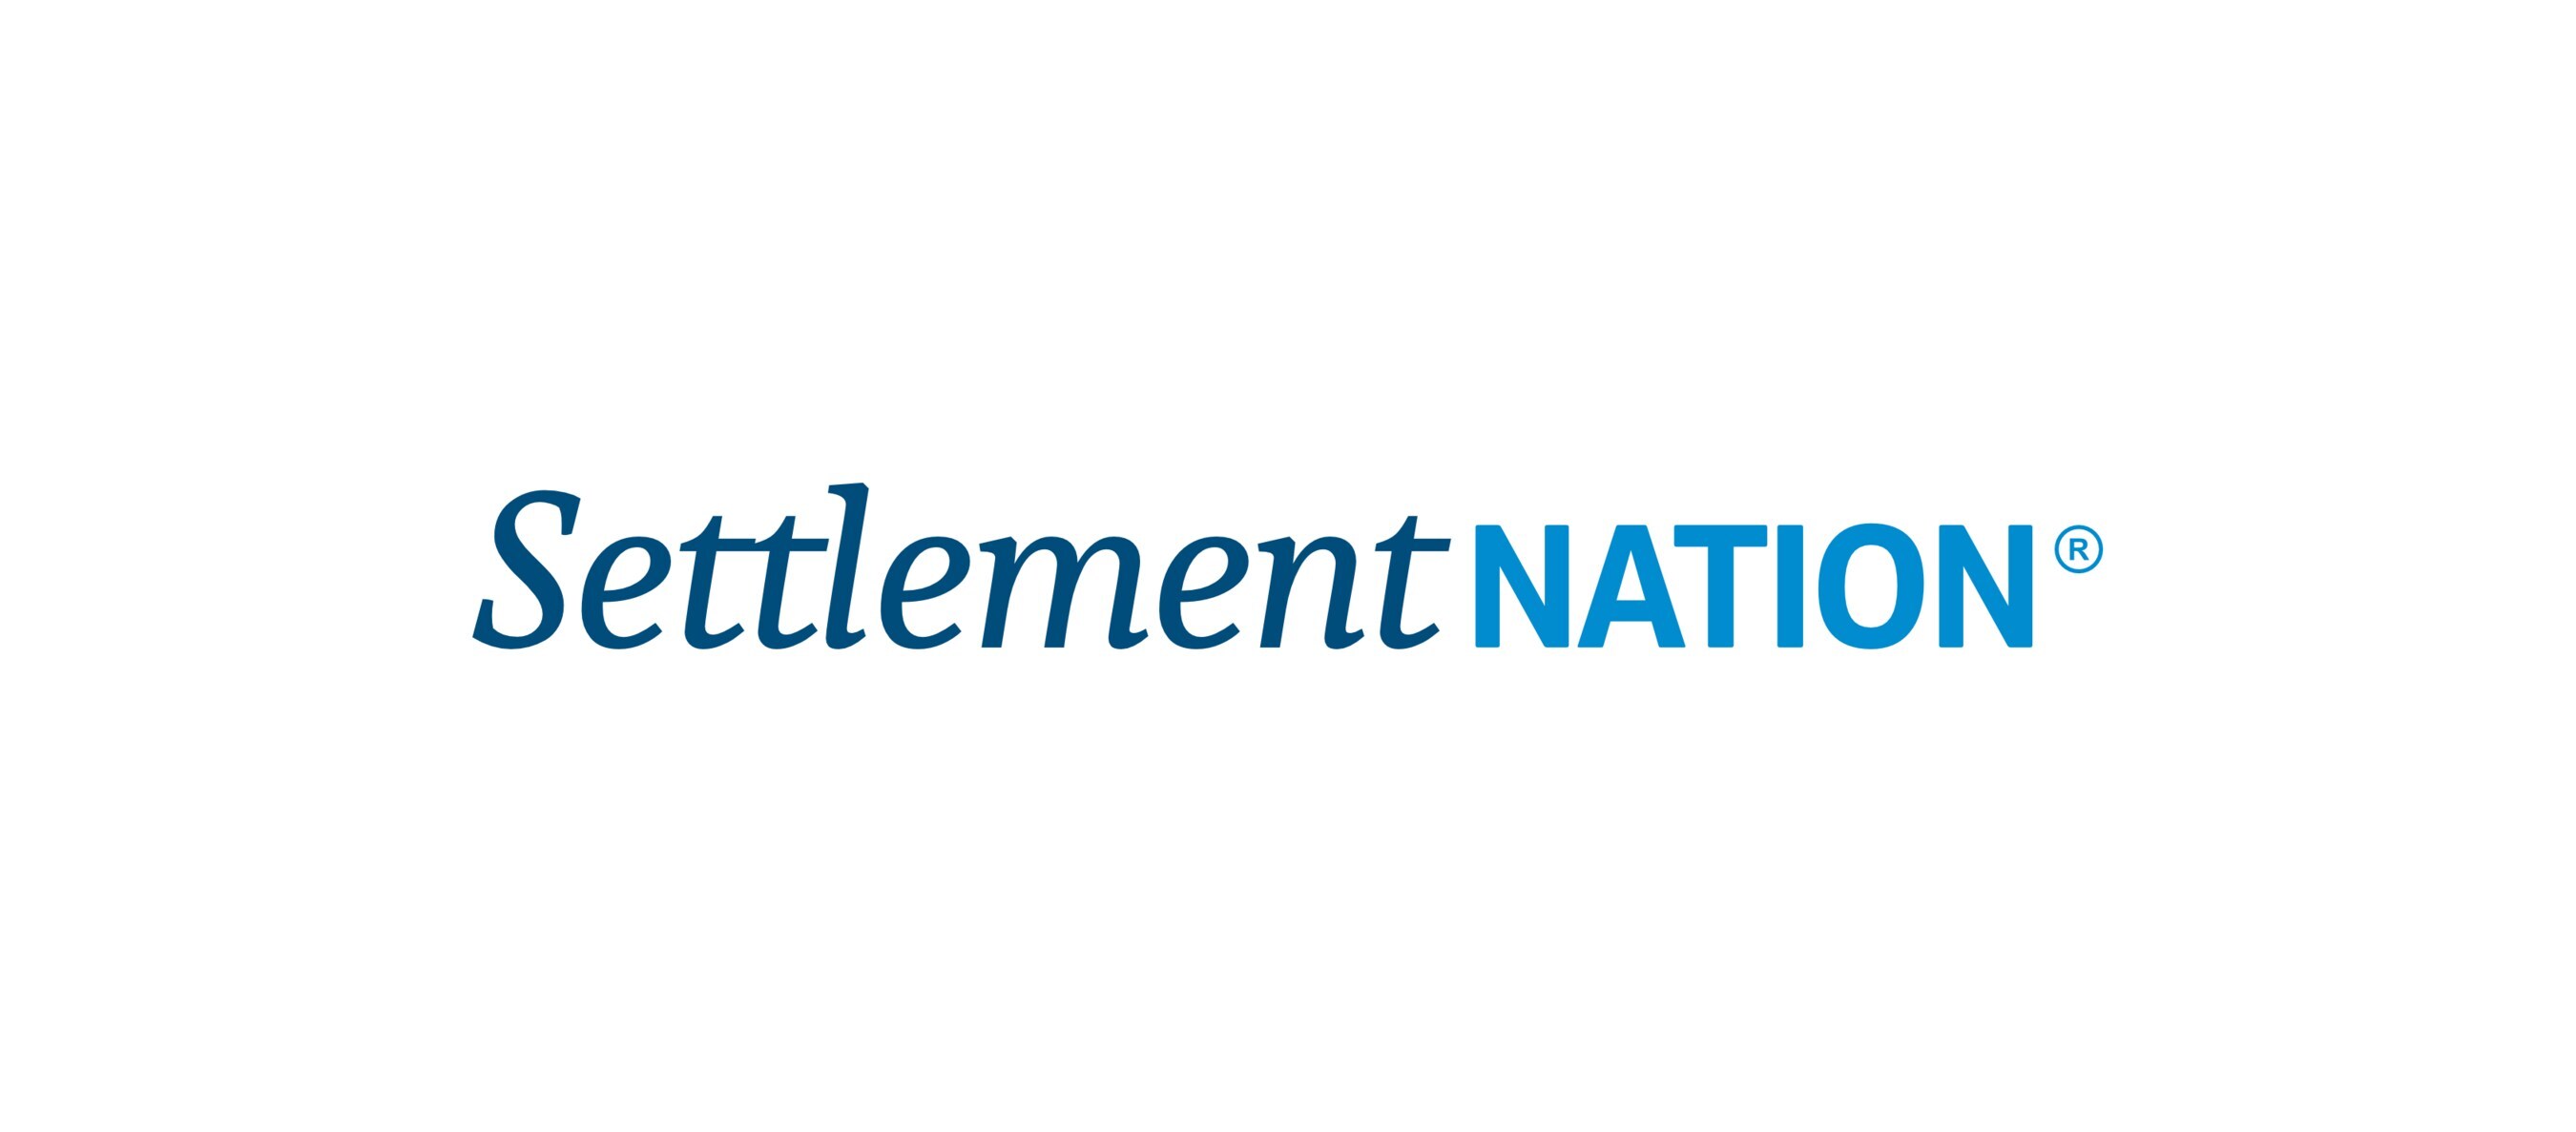 Settlement Nation featured in The National Law Review as one of the best law podcasts.